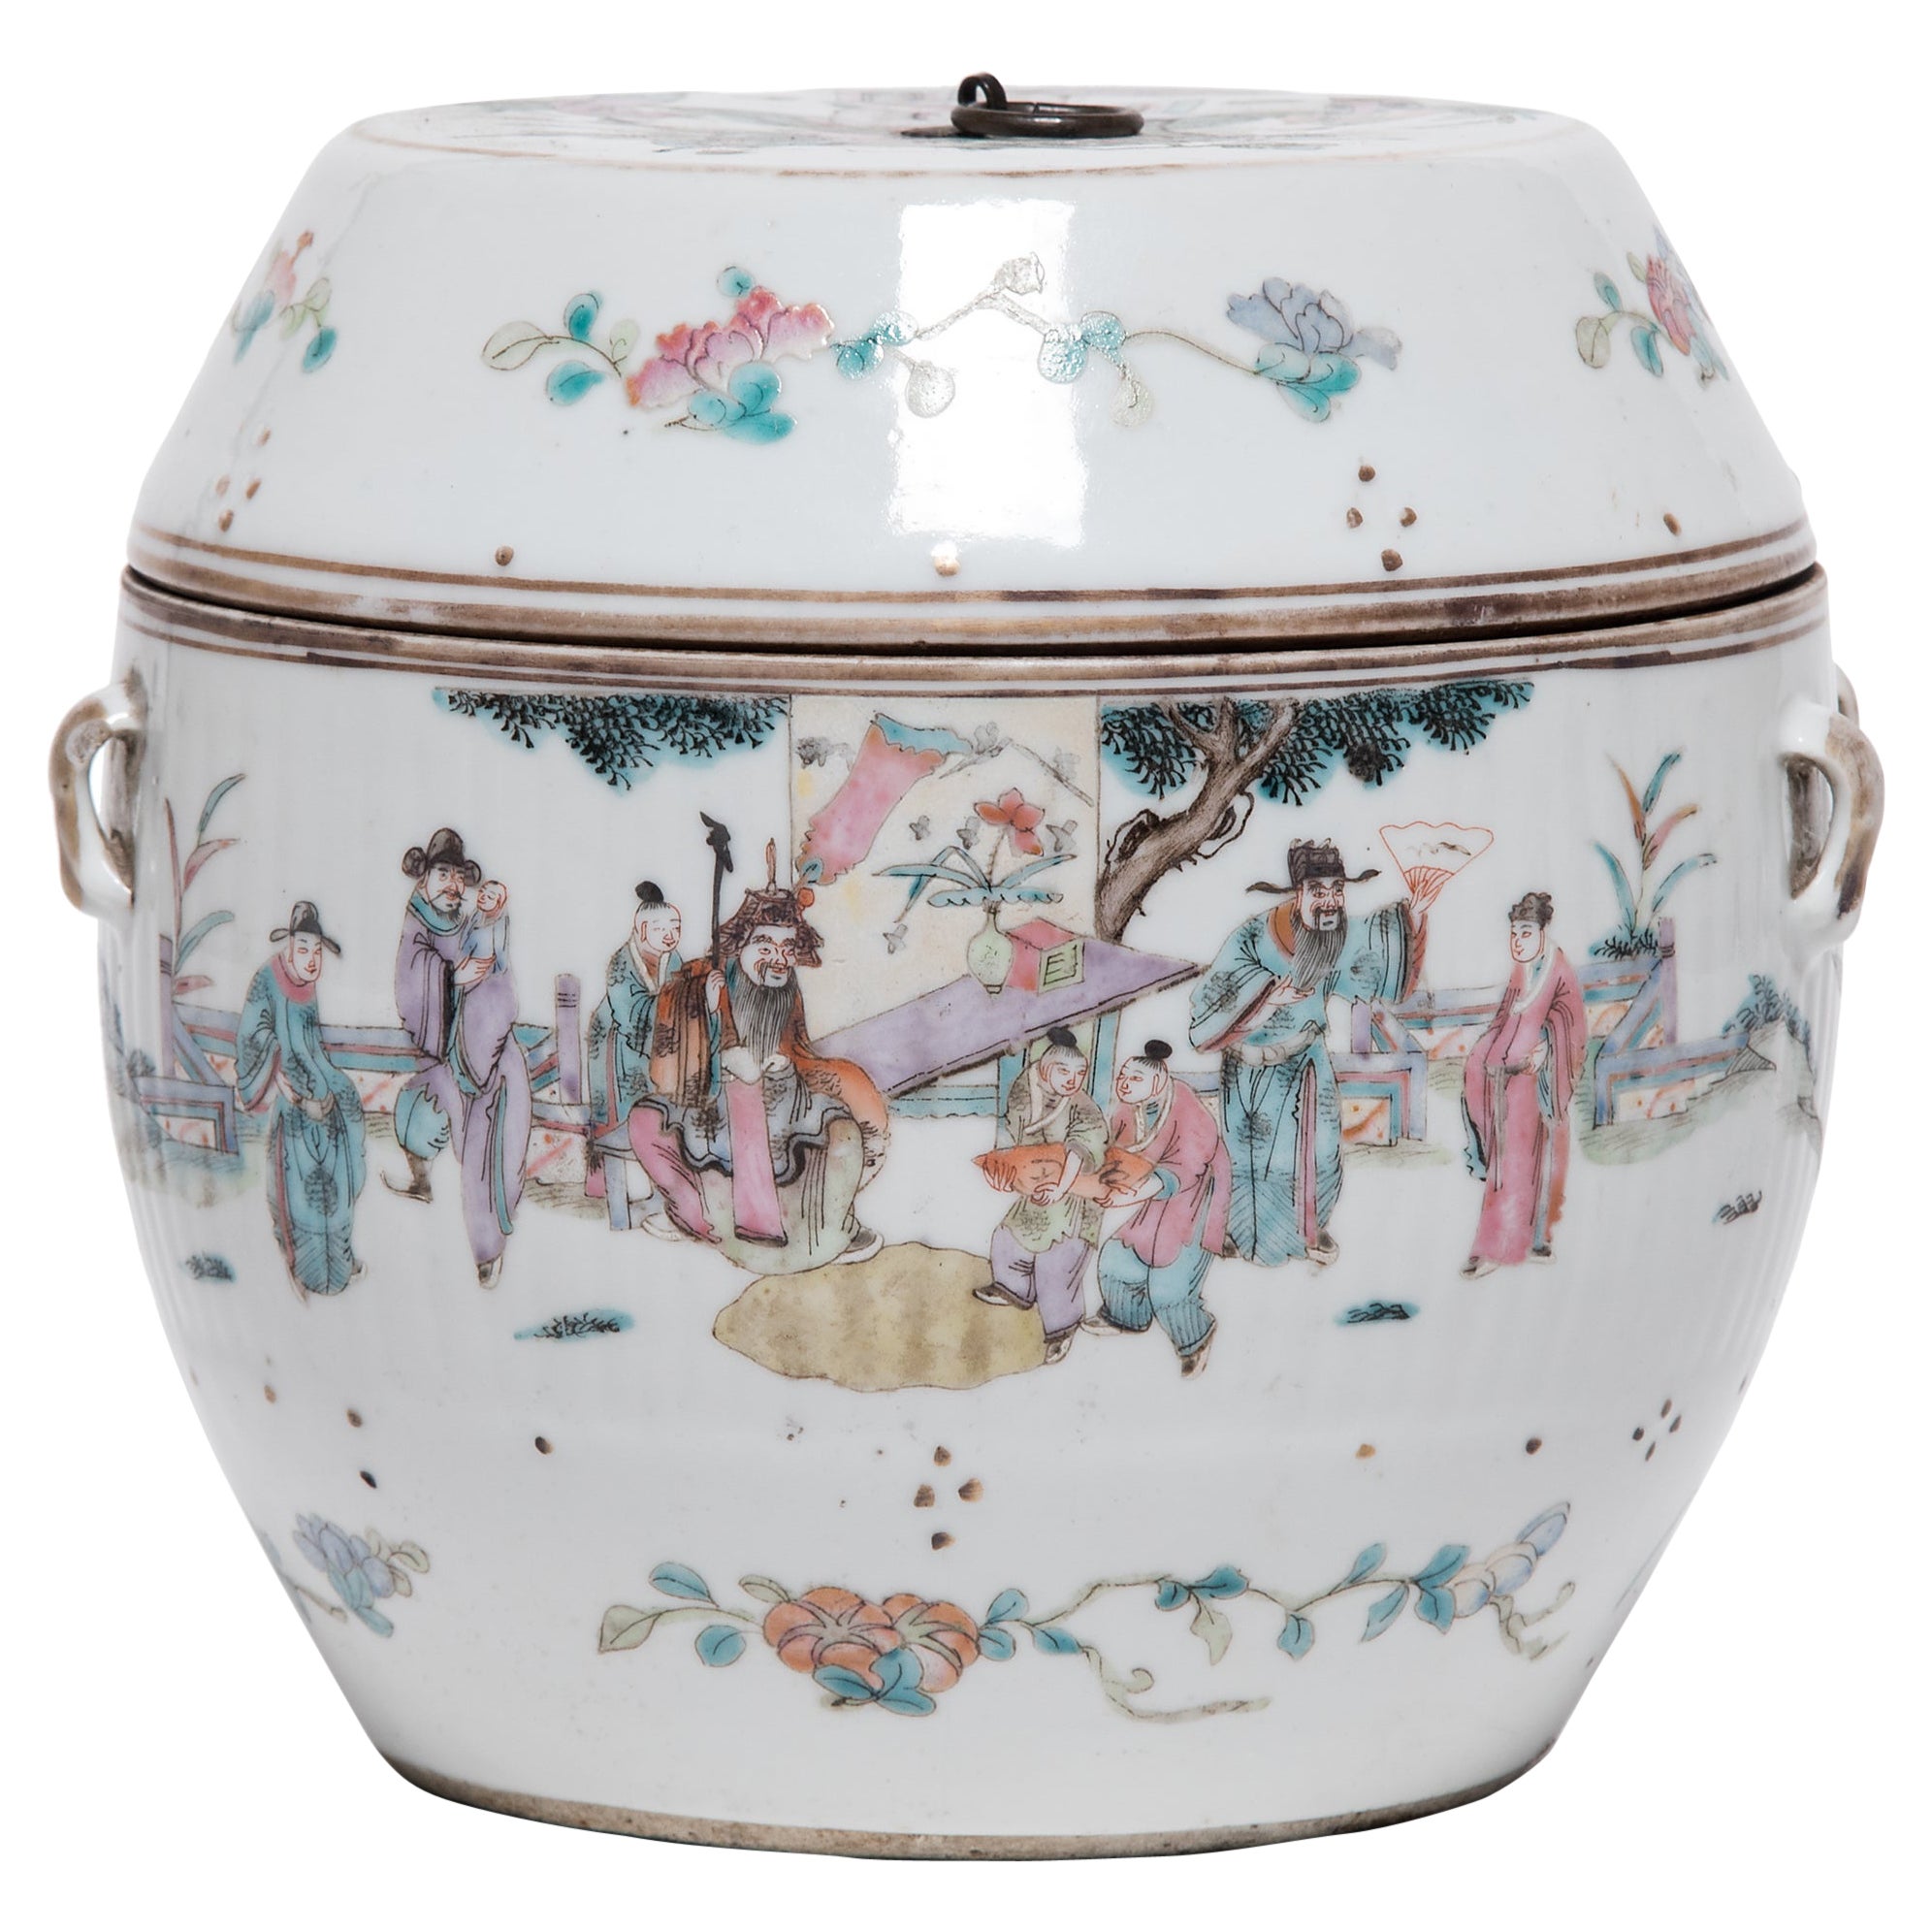 Chinese Famille Rose Soup Tureen with Courtly Gathering, c. 1870